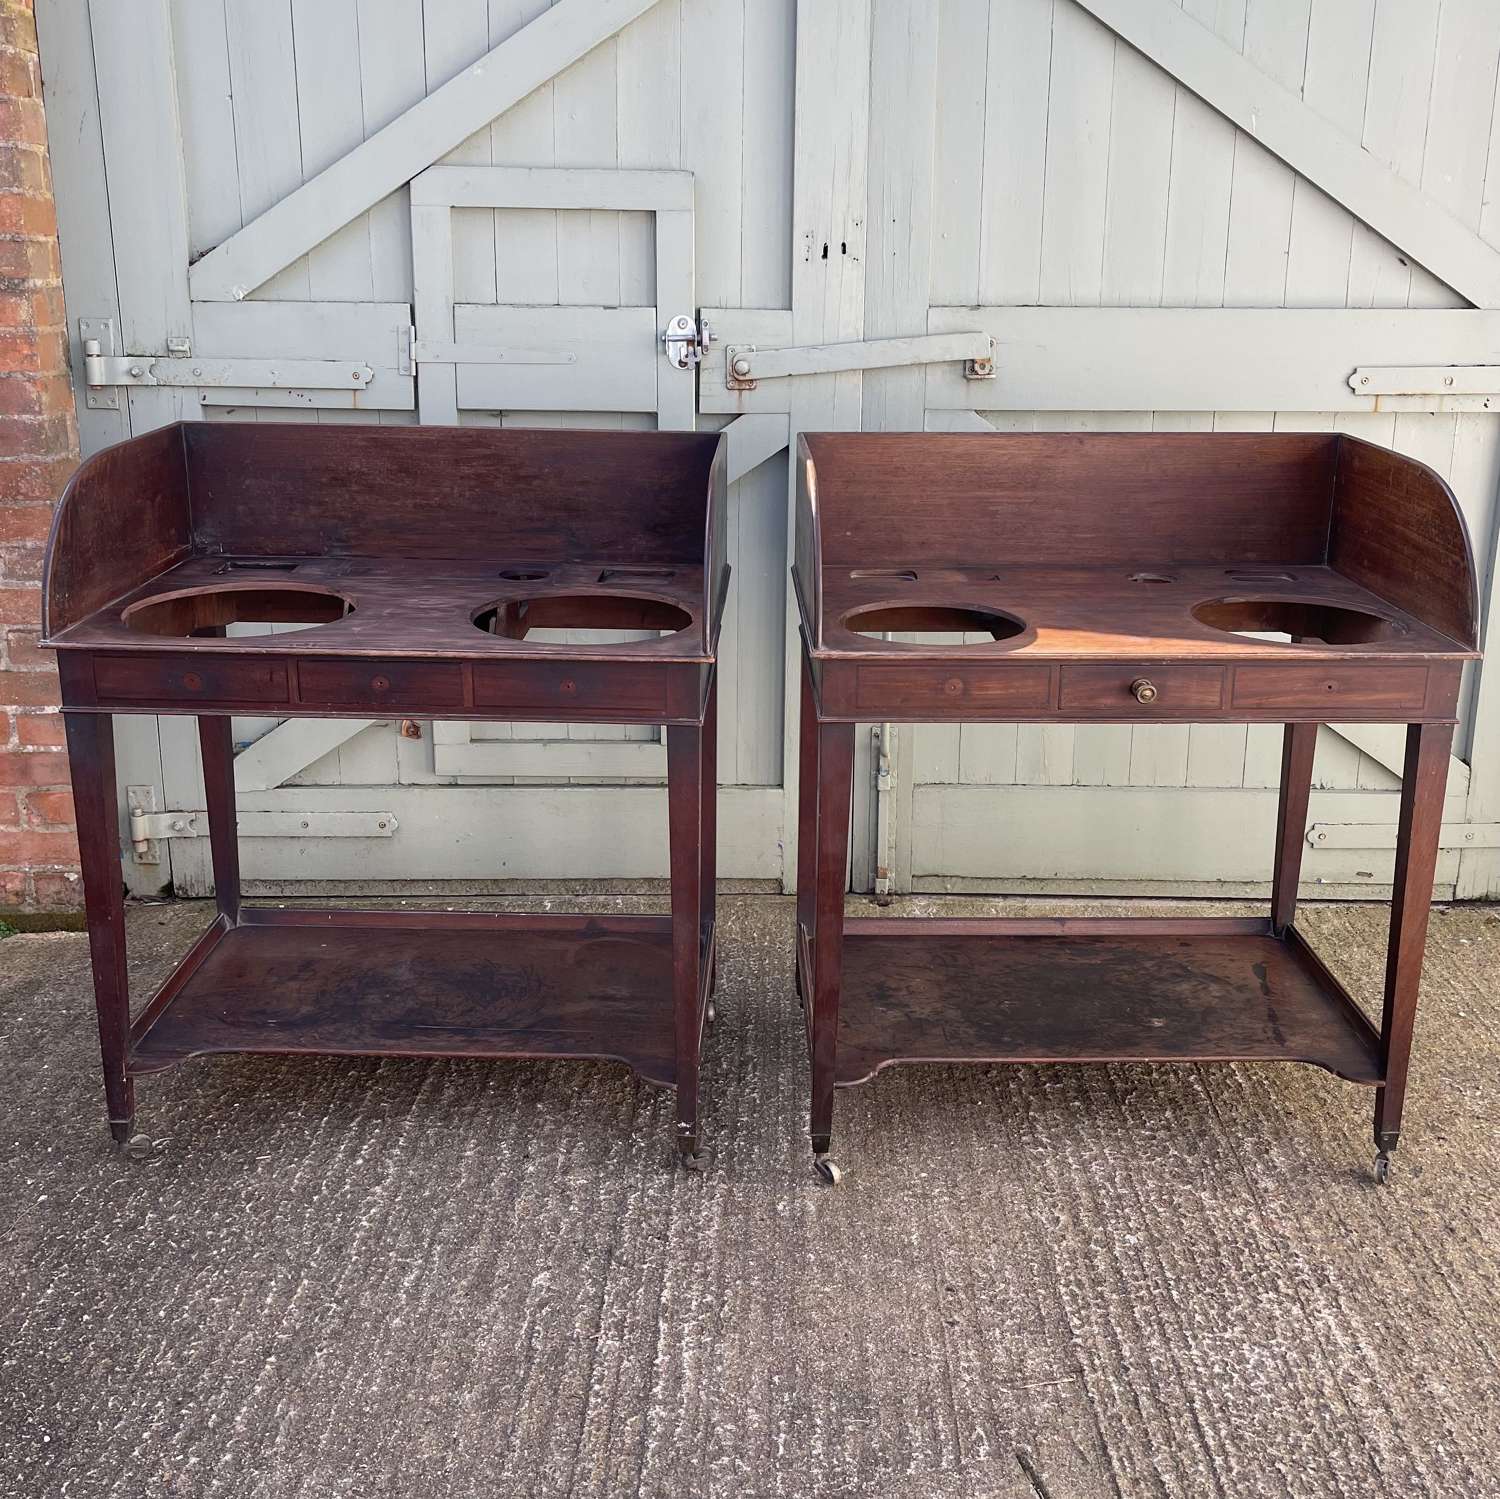 A pair of 18th century wash stands